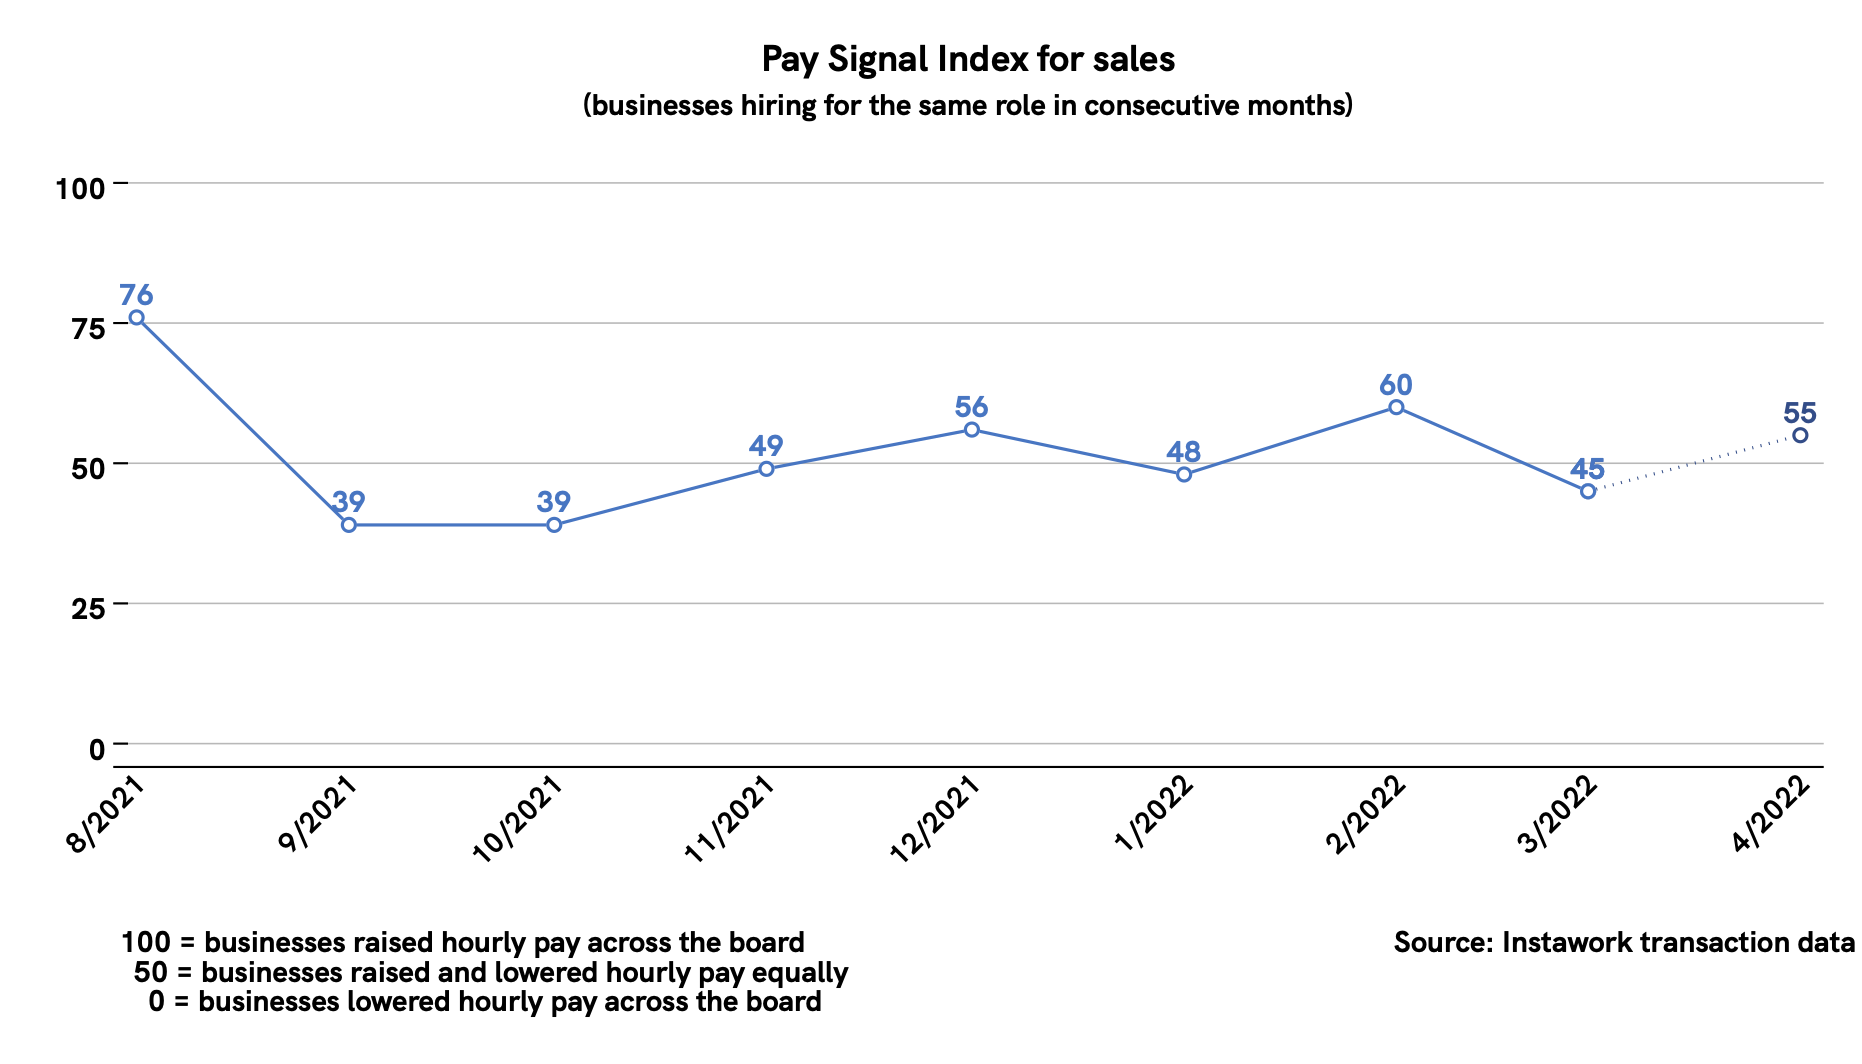 28 Mar 2022 Pay Signal Index for sales